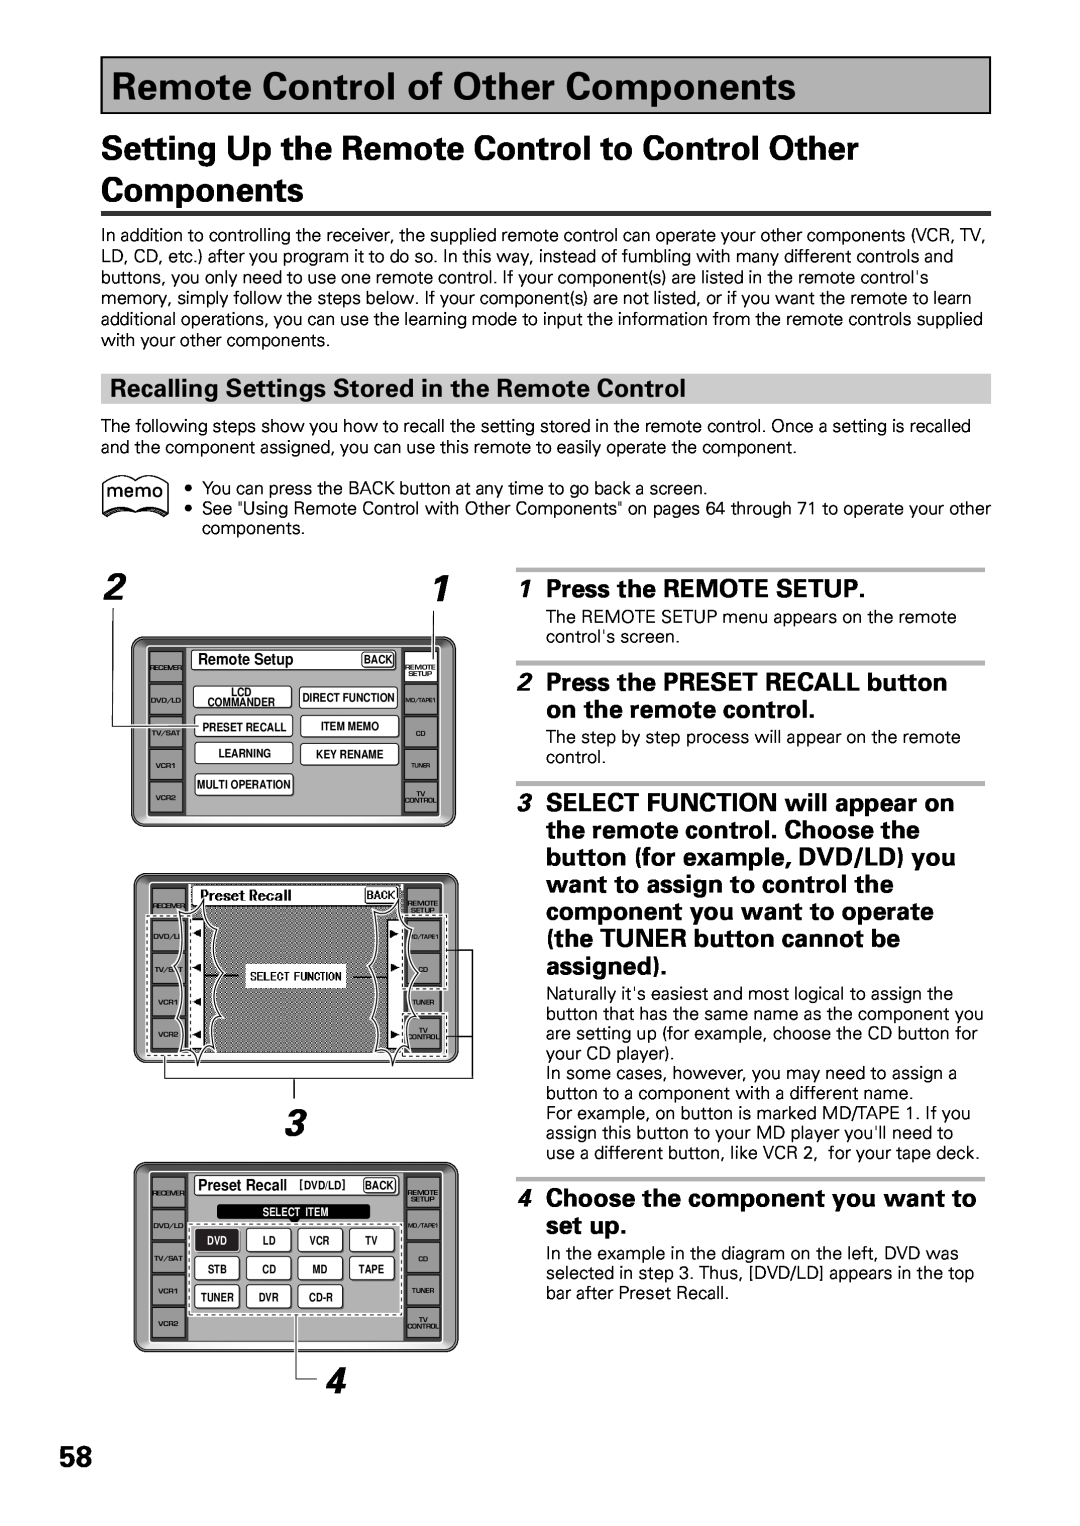 Pioneer VSX-39TX manual Remote Control of Other Components, Recalling Settings Stored in the Remote Control, assigned 